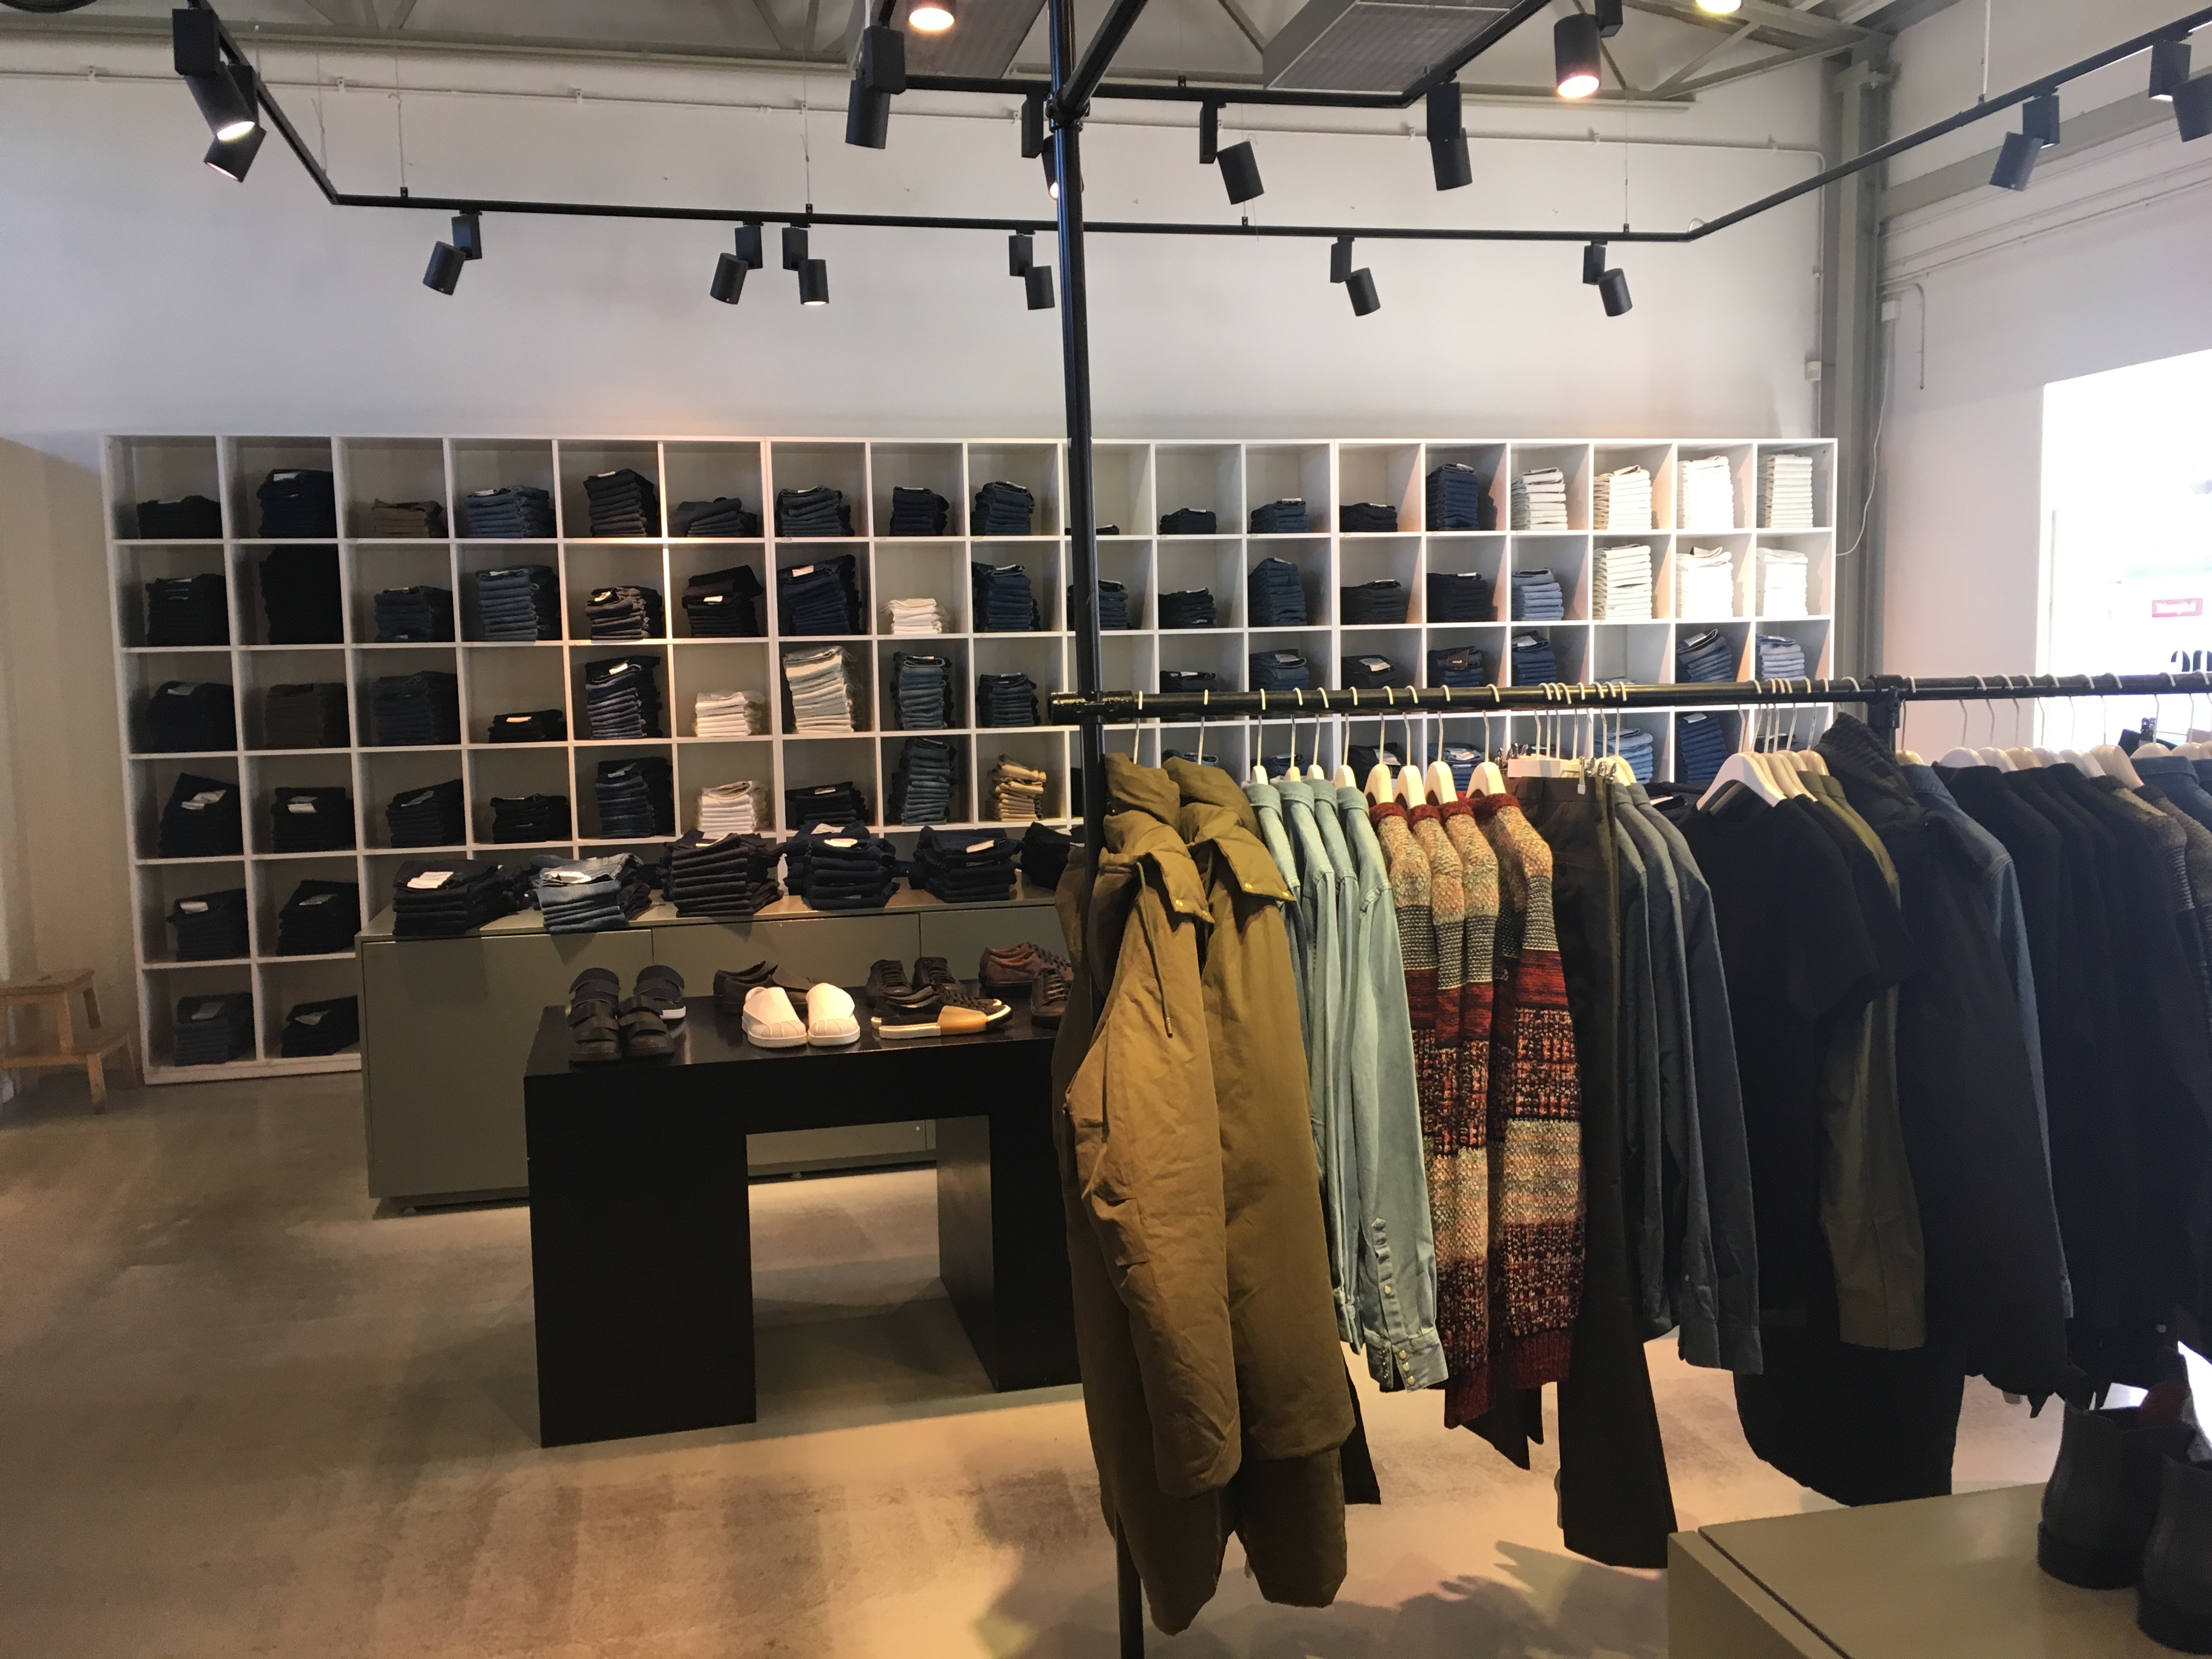 acne studios outlet store